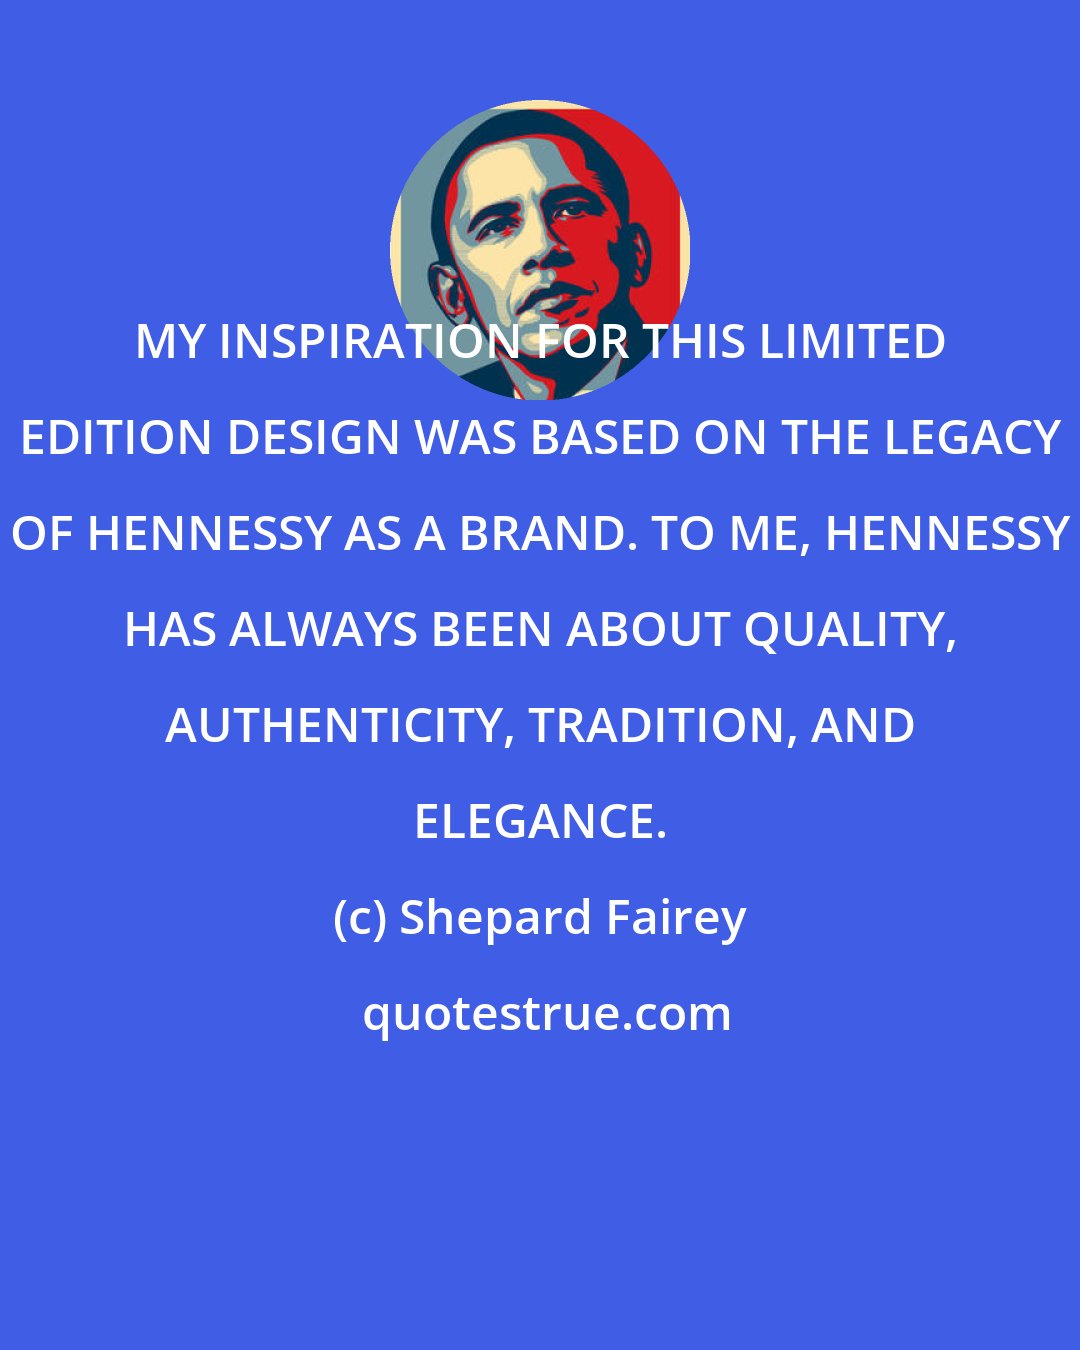 Shepard Fairey: MY INSPIRATION FOR THIS LIMITED EDITION DESIGN WAS BASED ON THE LEGACY OF HENNESSY AS A BRAND. TO ME, HENNESSY HAS ALWAYS BEEN ABOUT QUALITY, AUTHENTICITY, TRADITION, AND ELEGANCE.